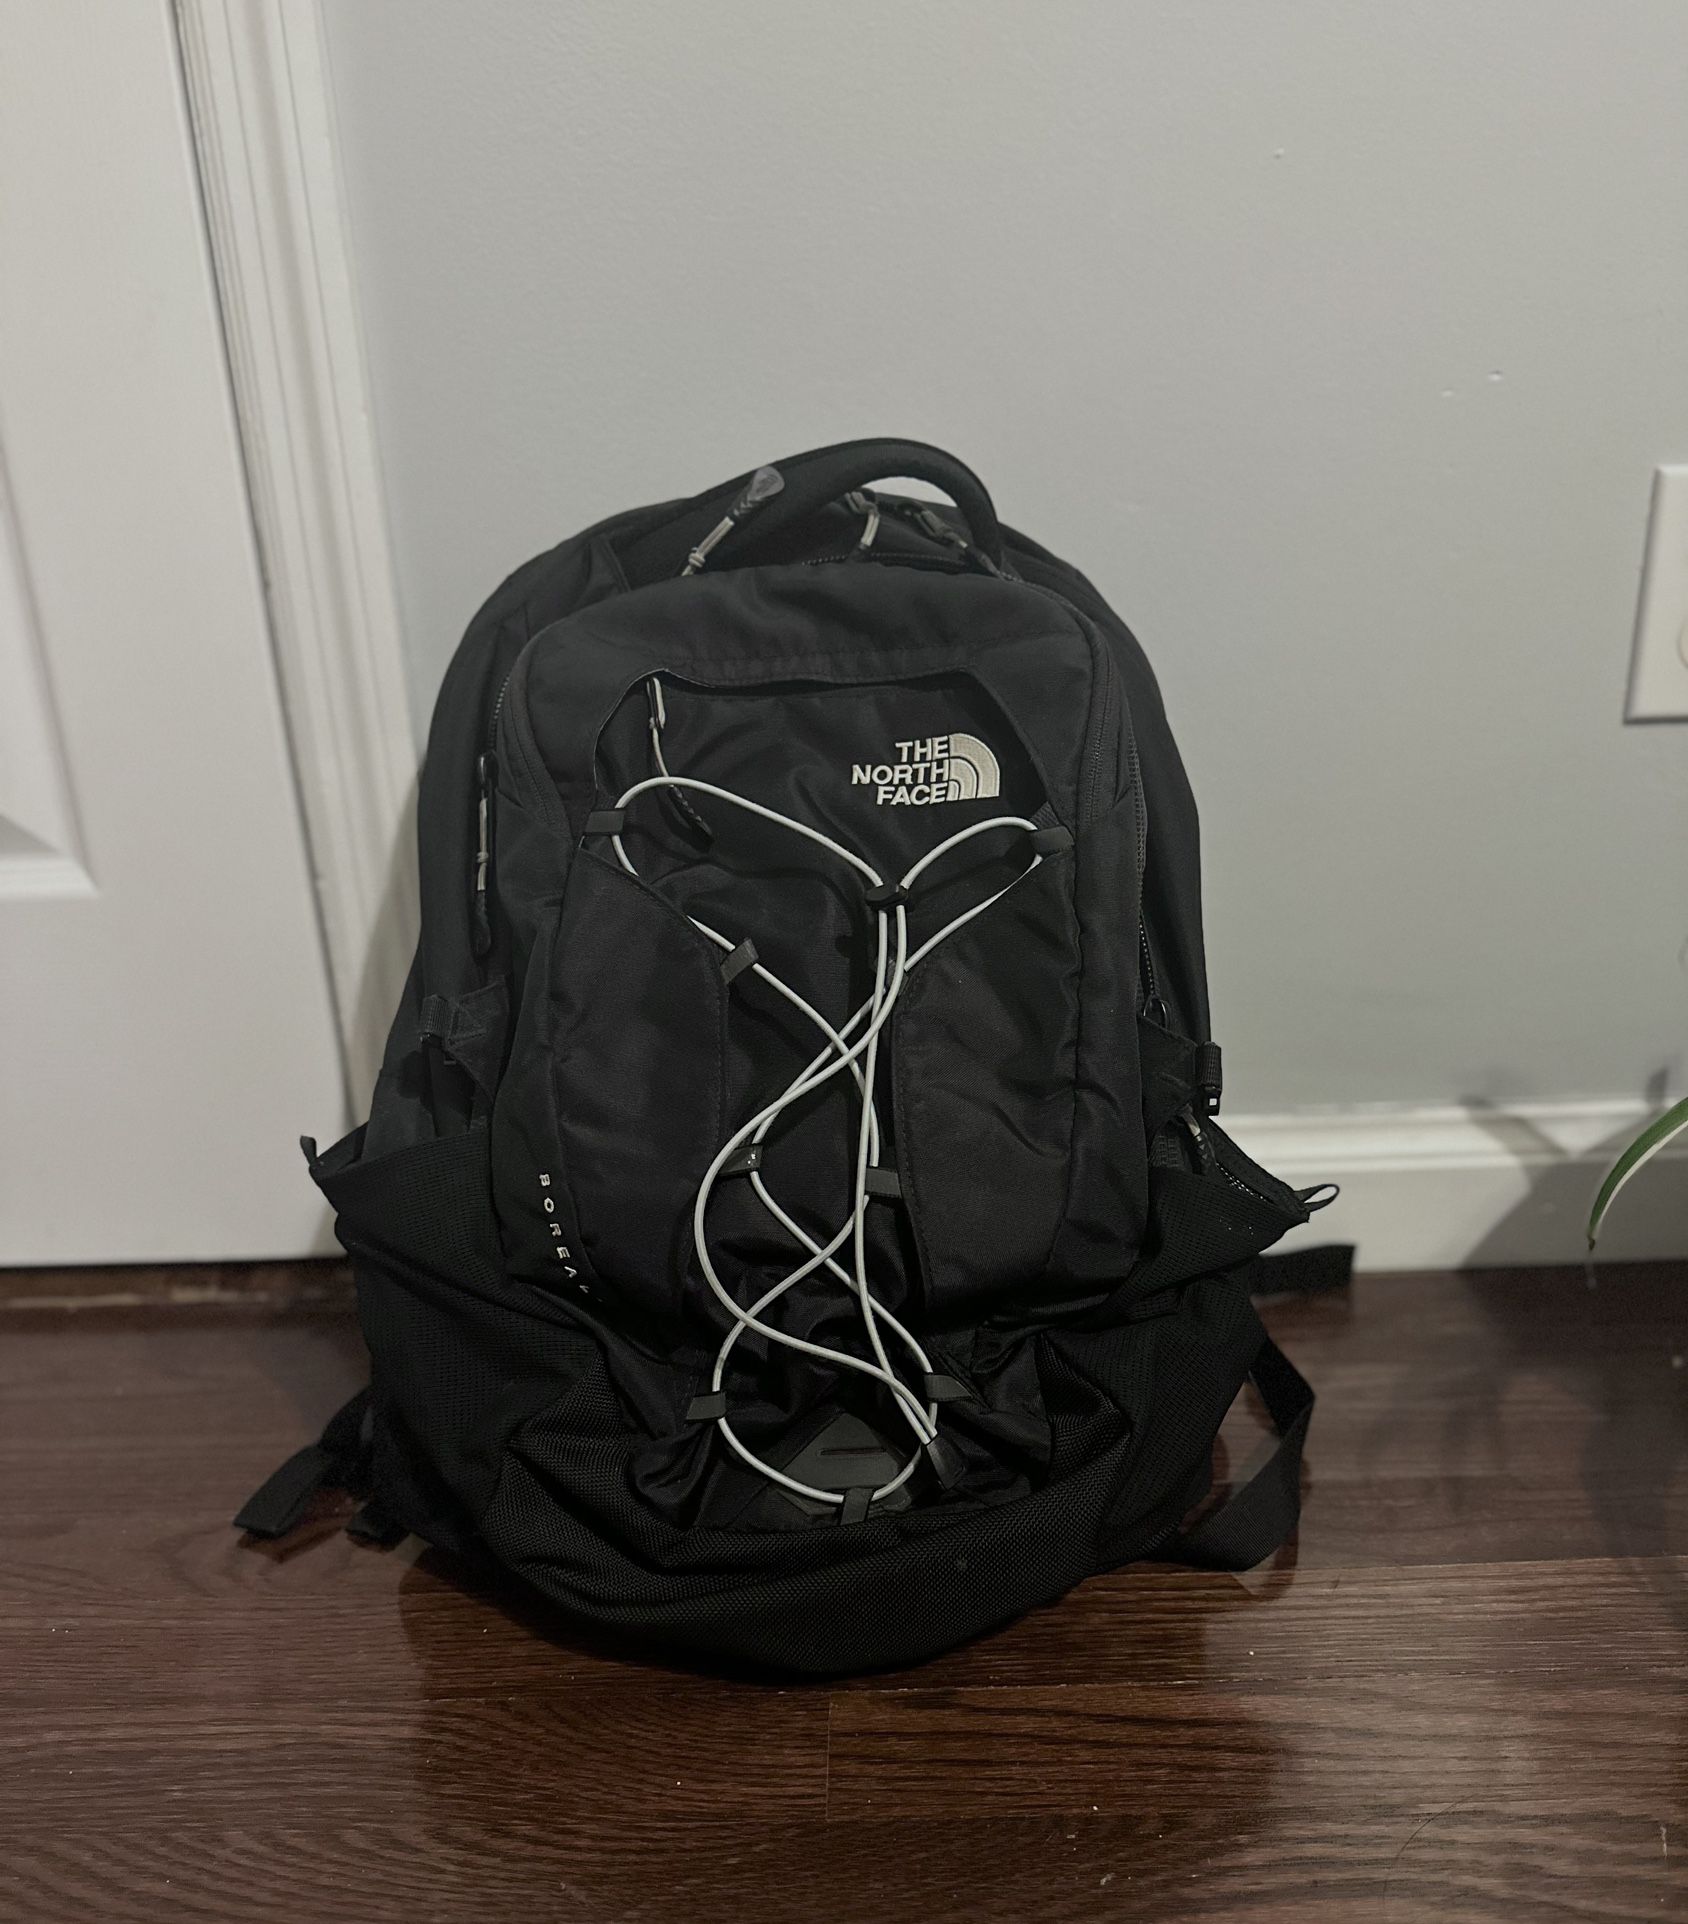 The North Face Backpack - Women’s Borealis 